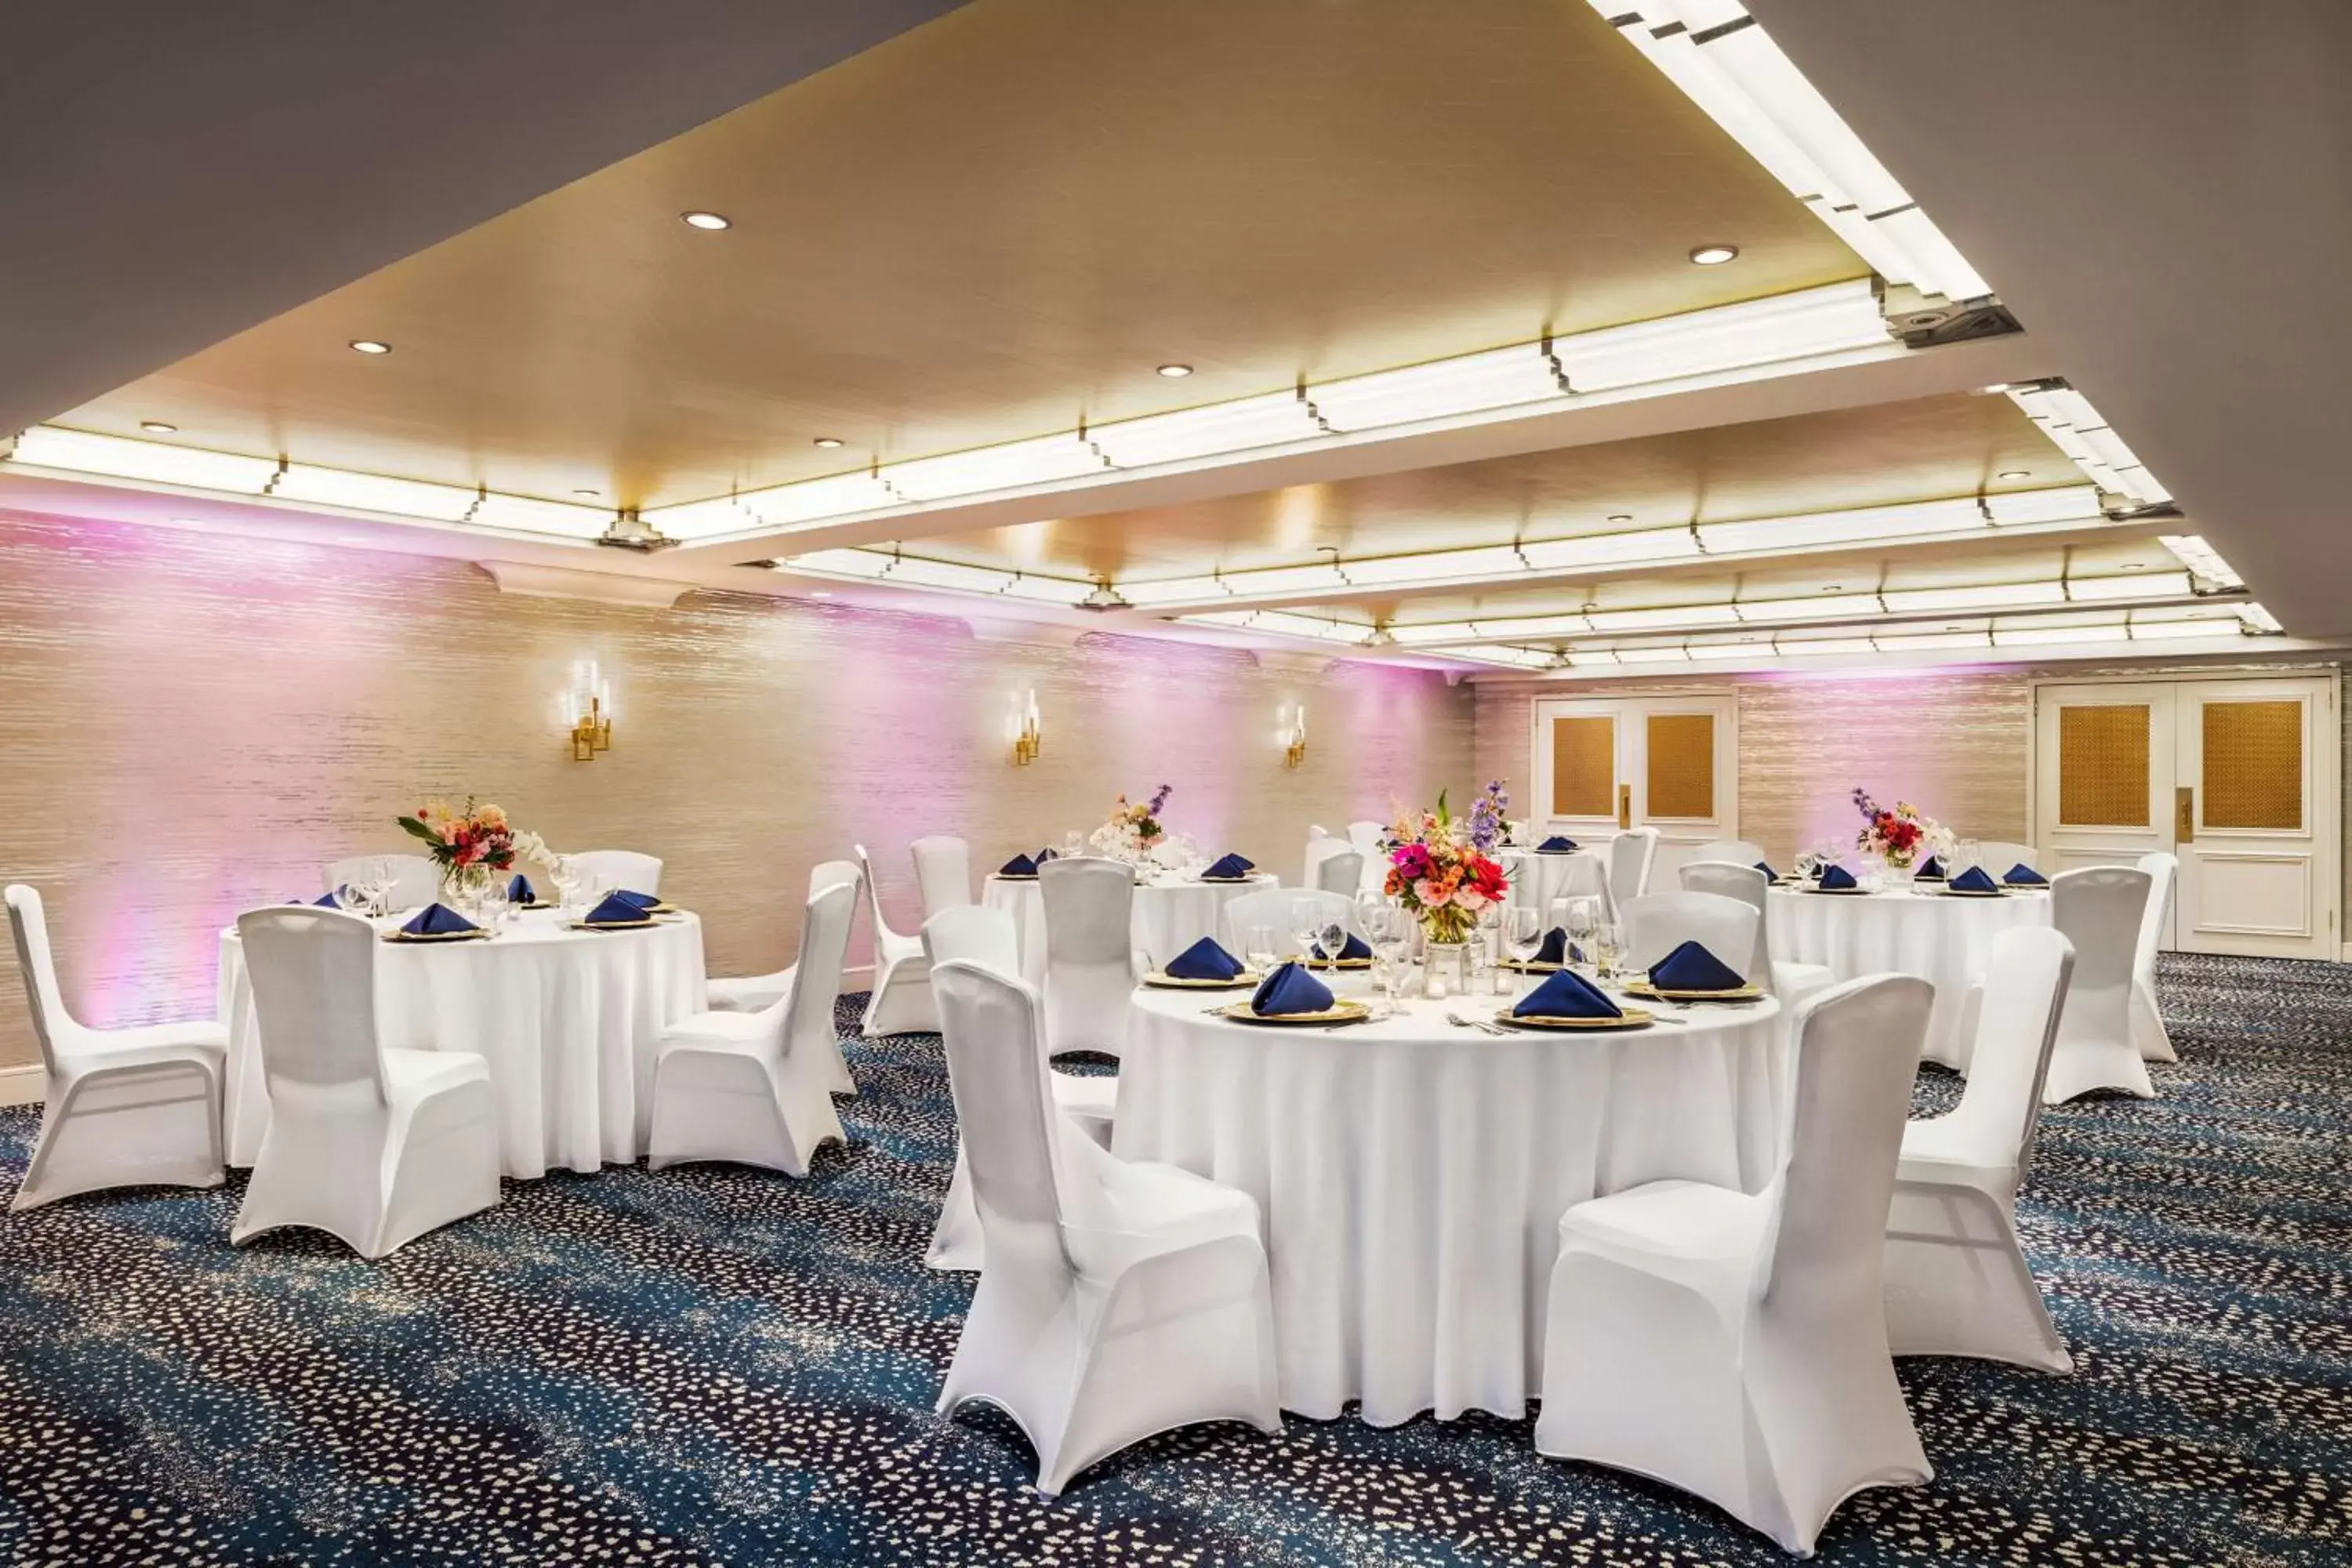 Banquet/Function facilities, Banquet Facilities in Inn at Great Neck